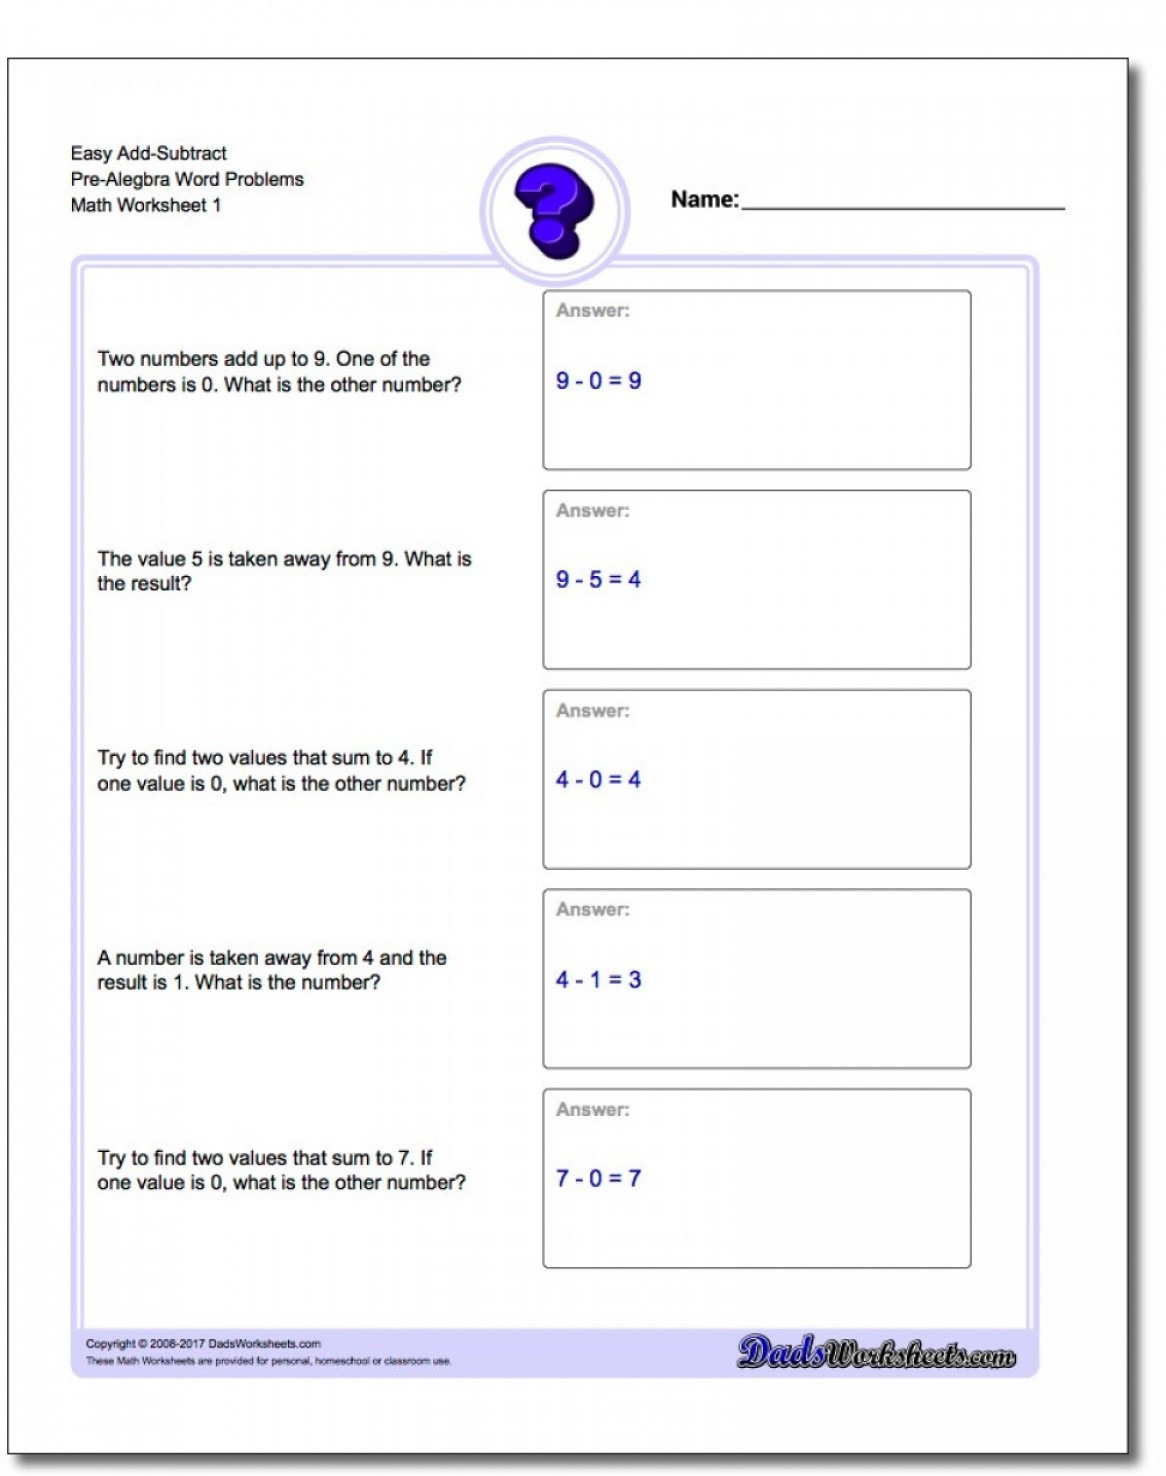 Linear Function Word Problems Worksheet Linear Programming Word Problems Worksheet